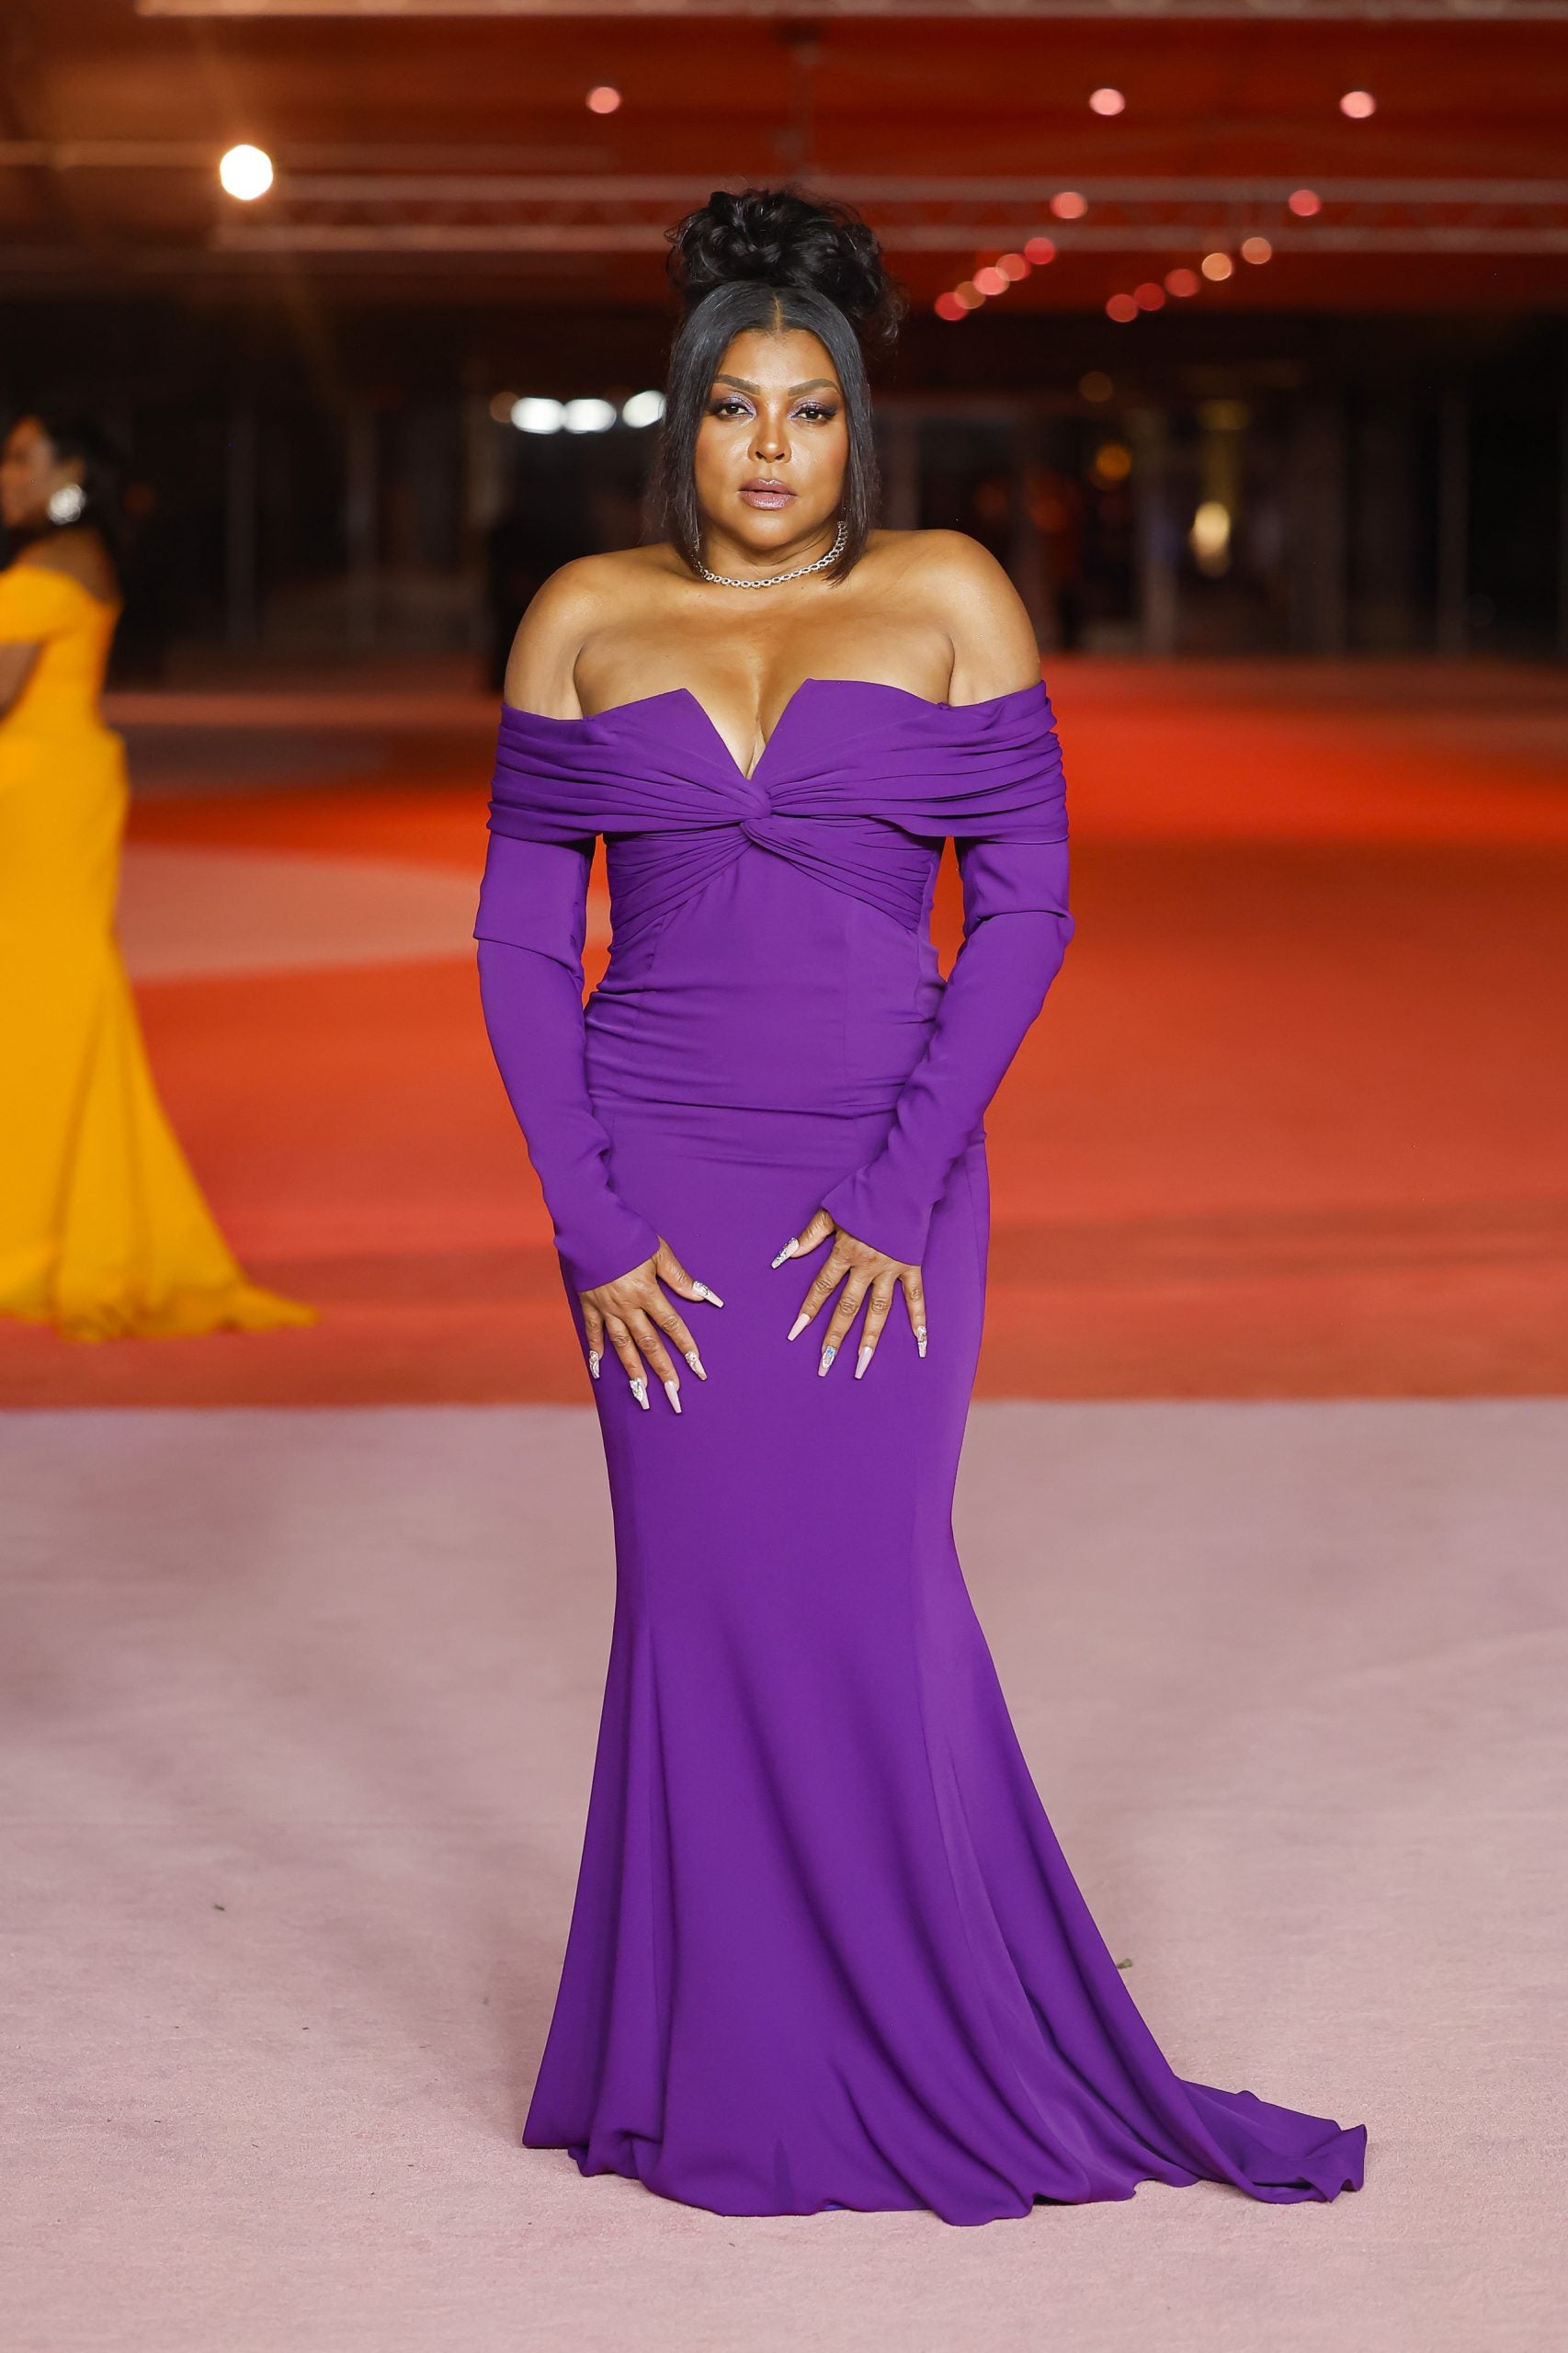 The Best Red Carpet Looks At The Academy Museum Gala: Jodie Turner-Smith, Taraji P. Henson, And More